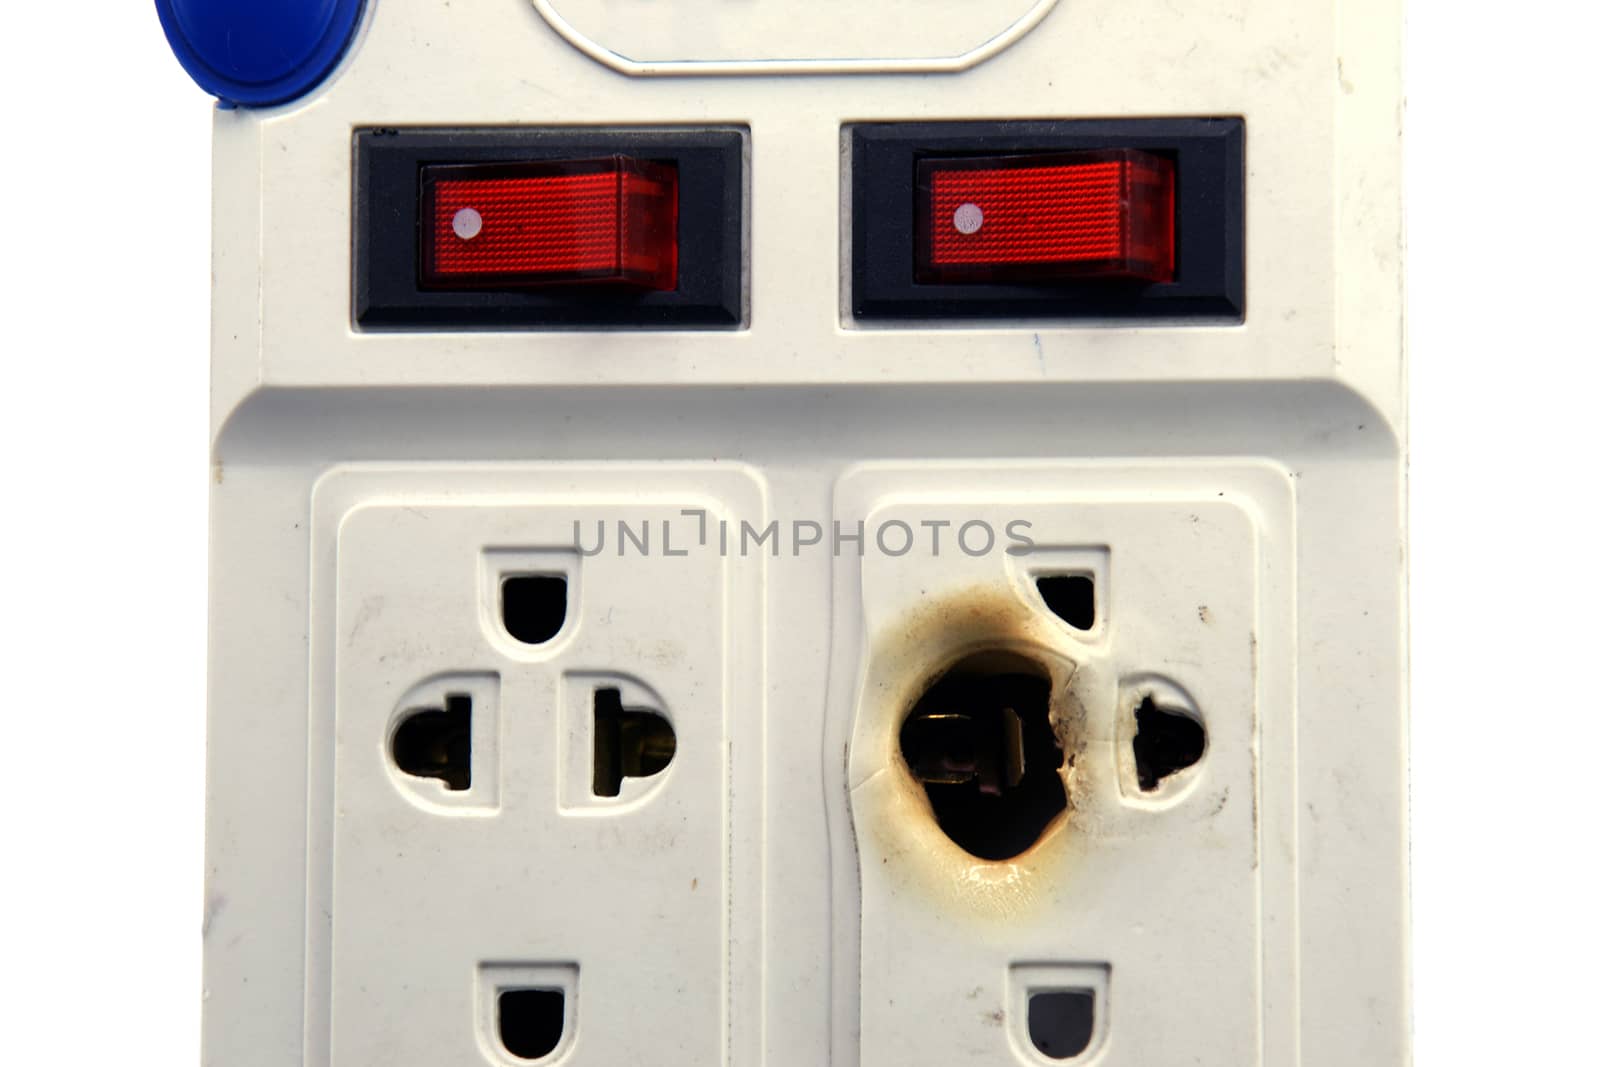 Dirty melted and burned electric outlet plug on white background by mranucha